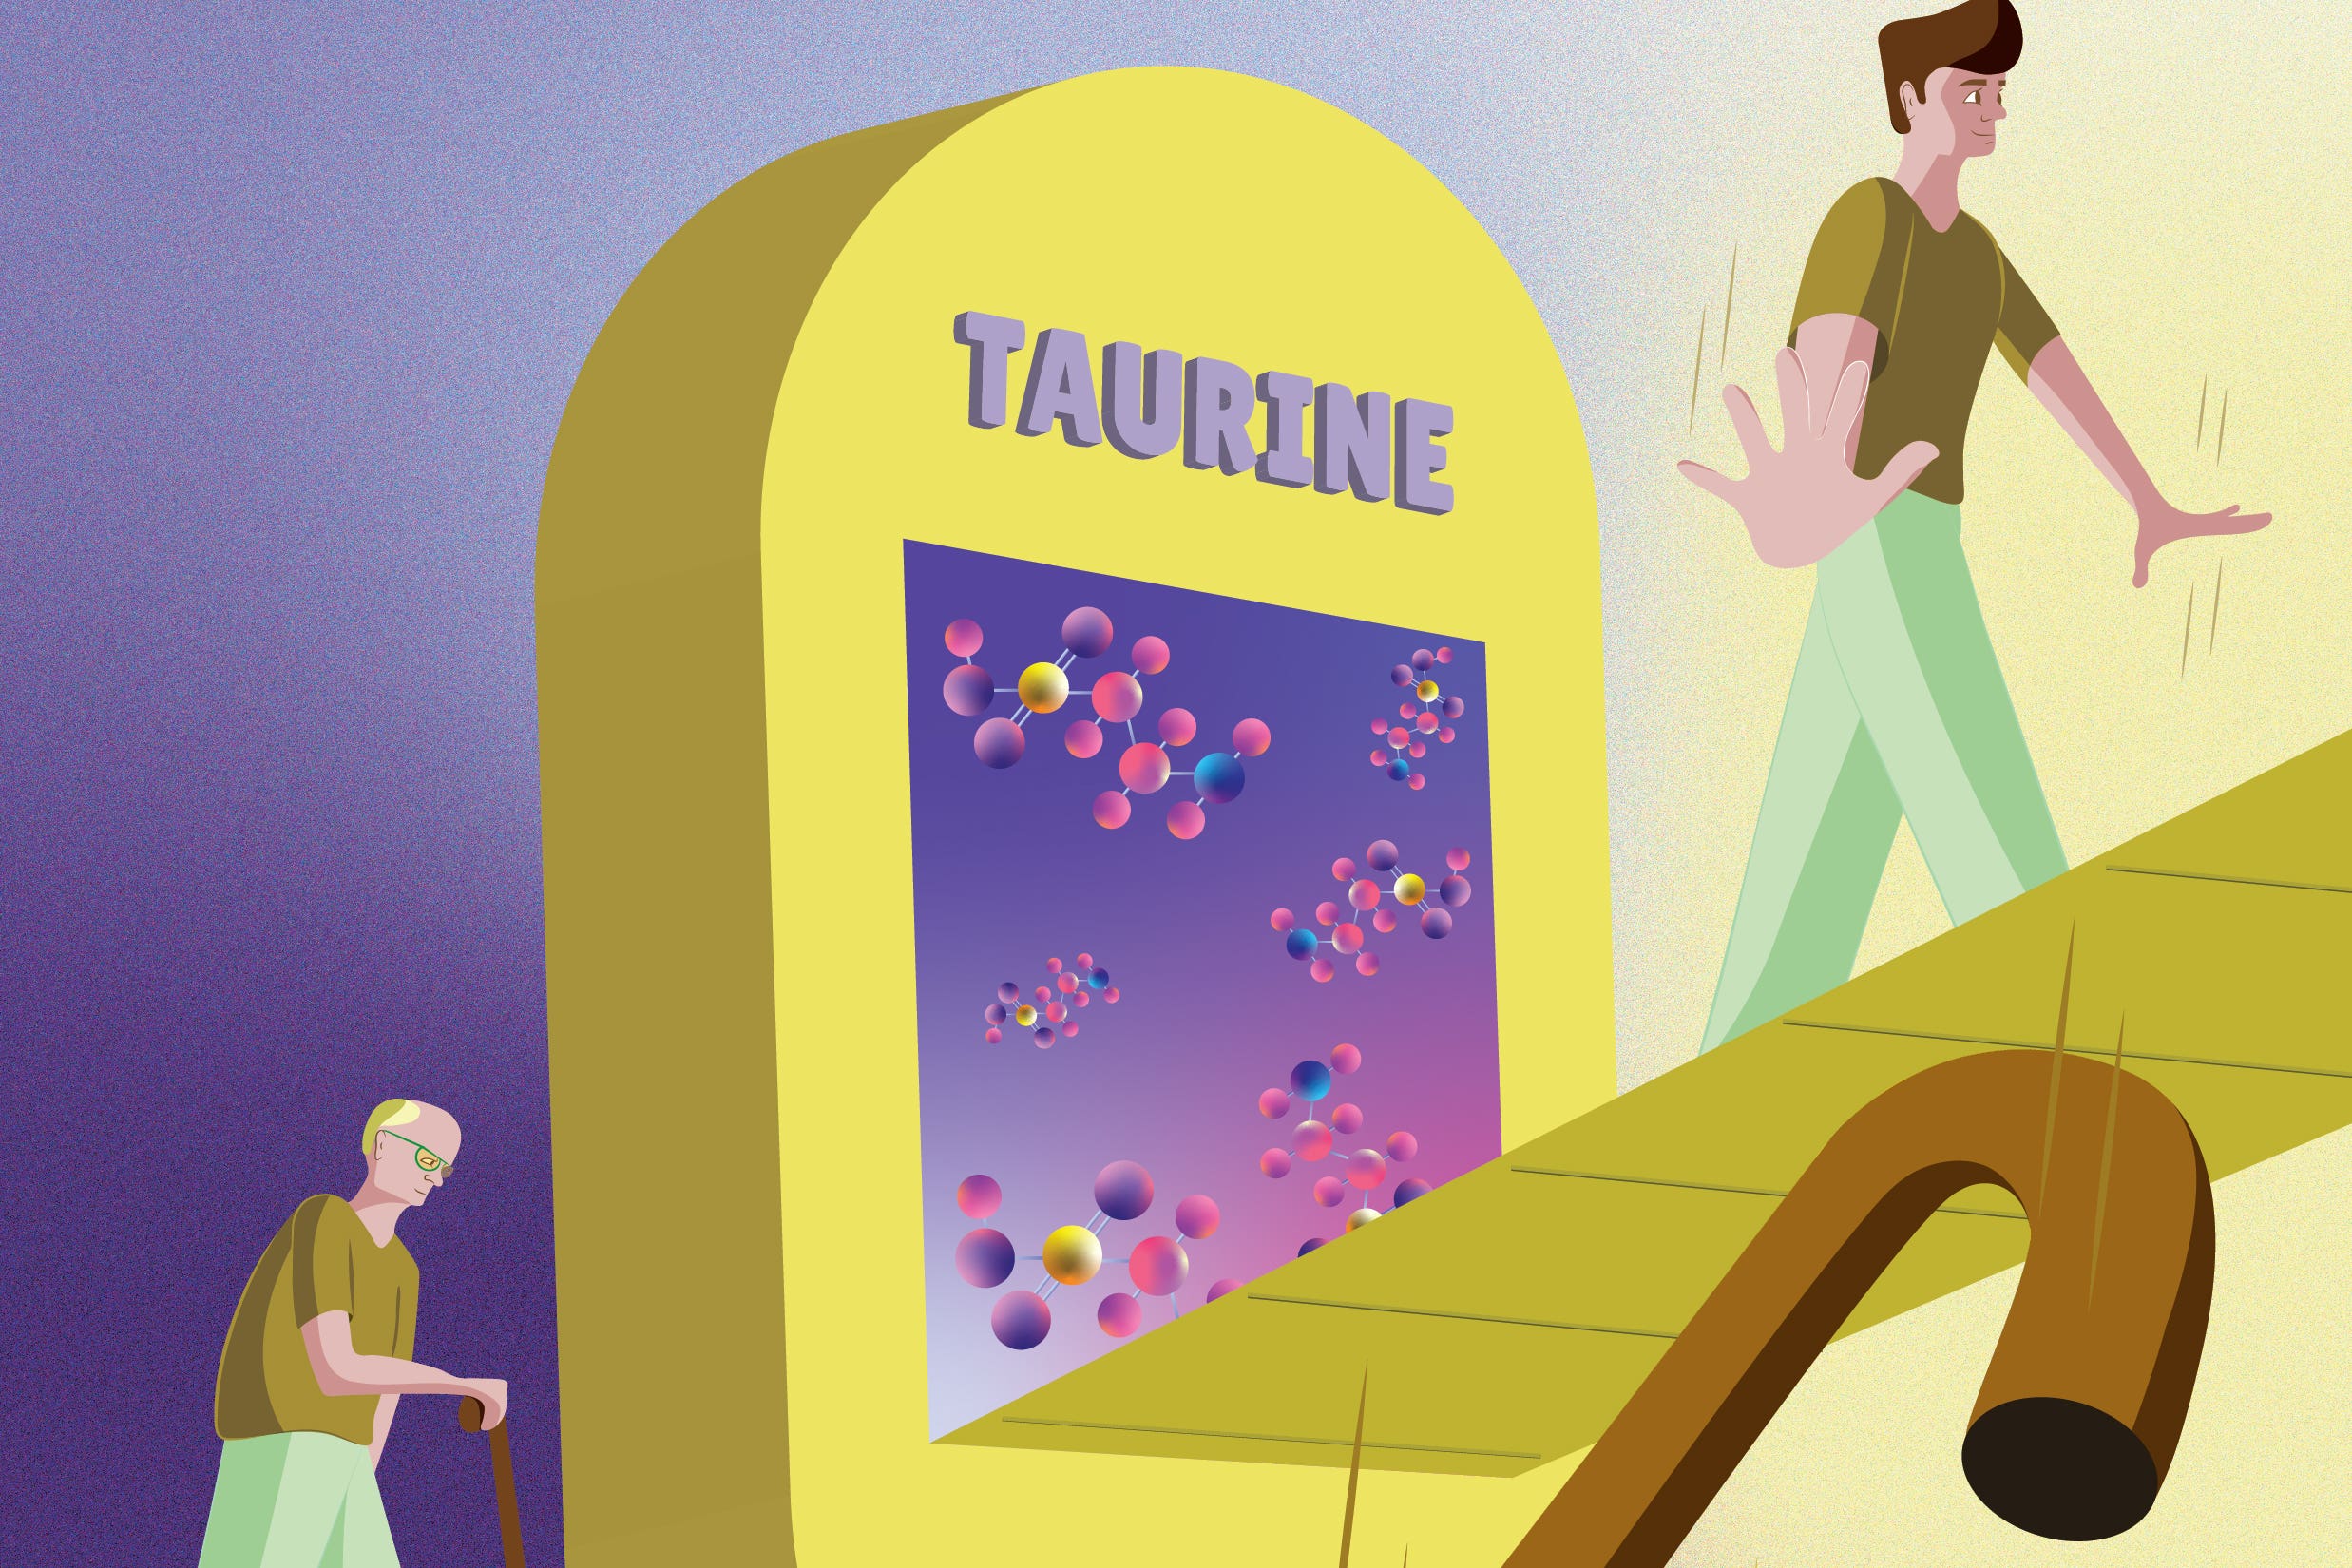 Taurine is an amino acid found in meat, fish and eggs (Columbia University Irving Medical Centre)